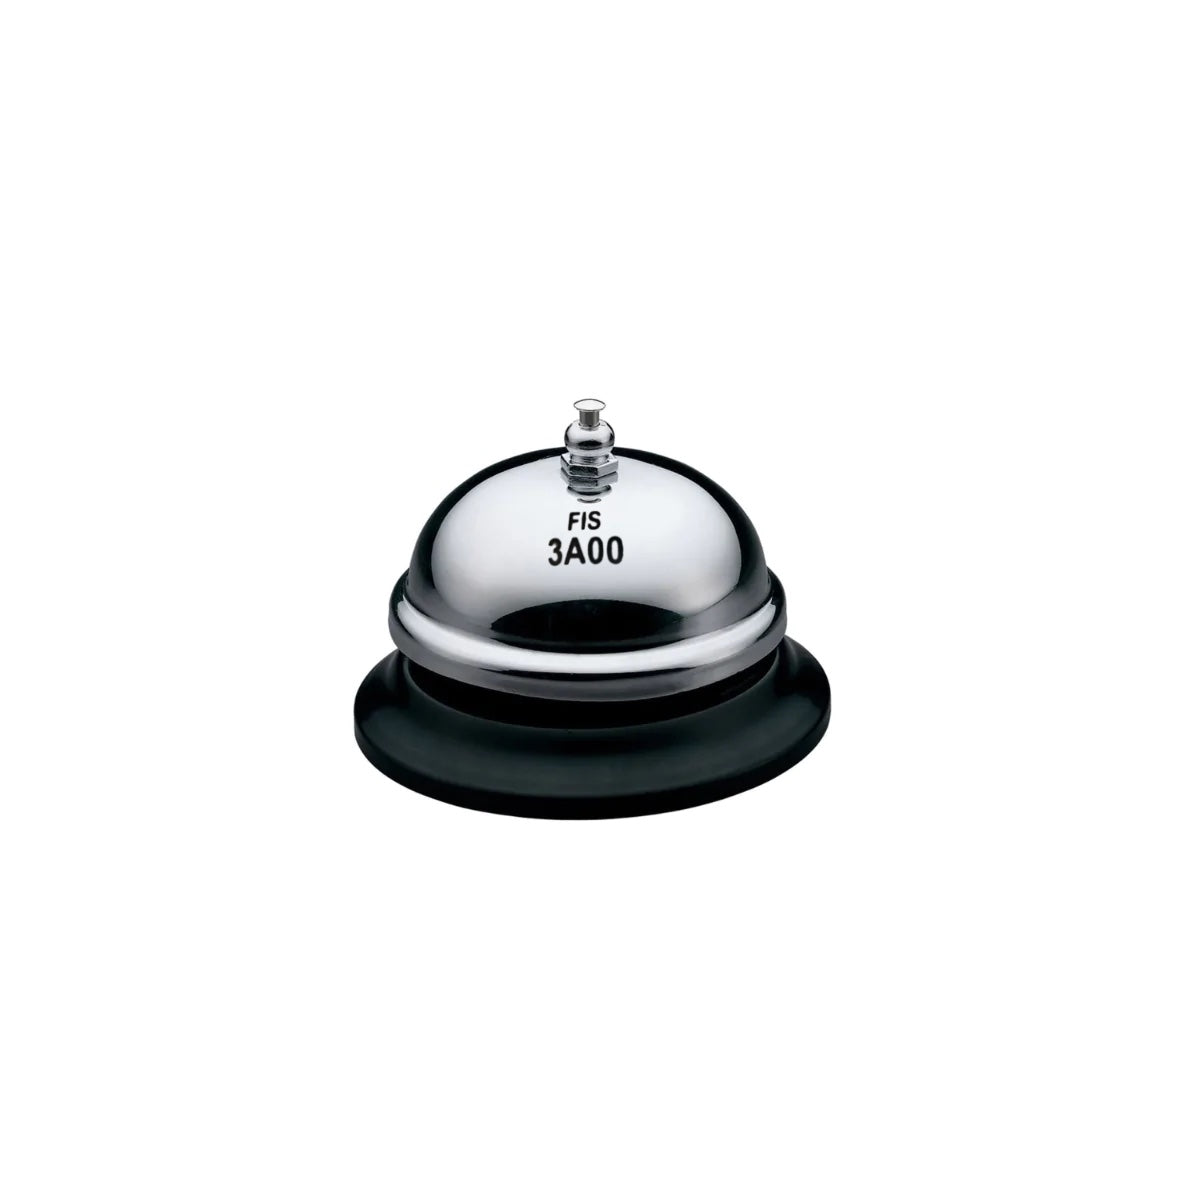 FIS Counter Call Bell for Reception, Medium 8.5 x 5.5 cm, Black/Steel